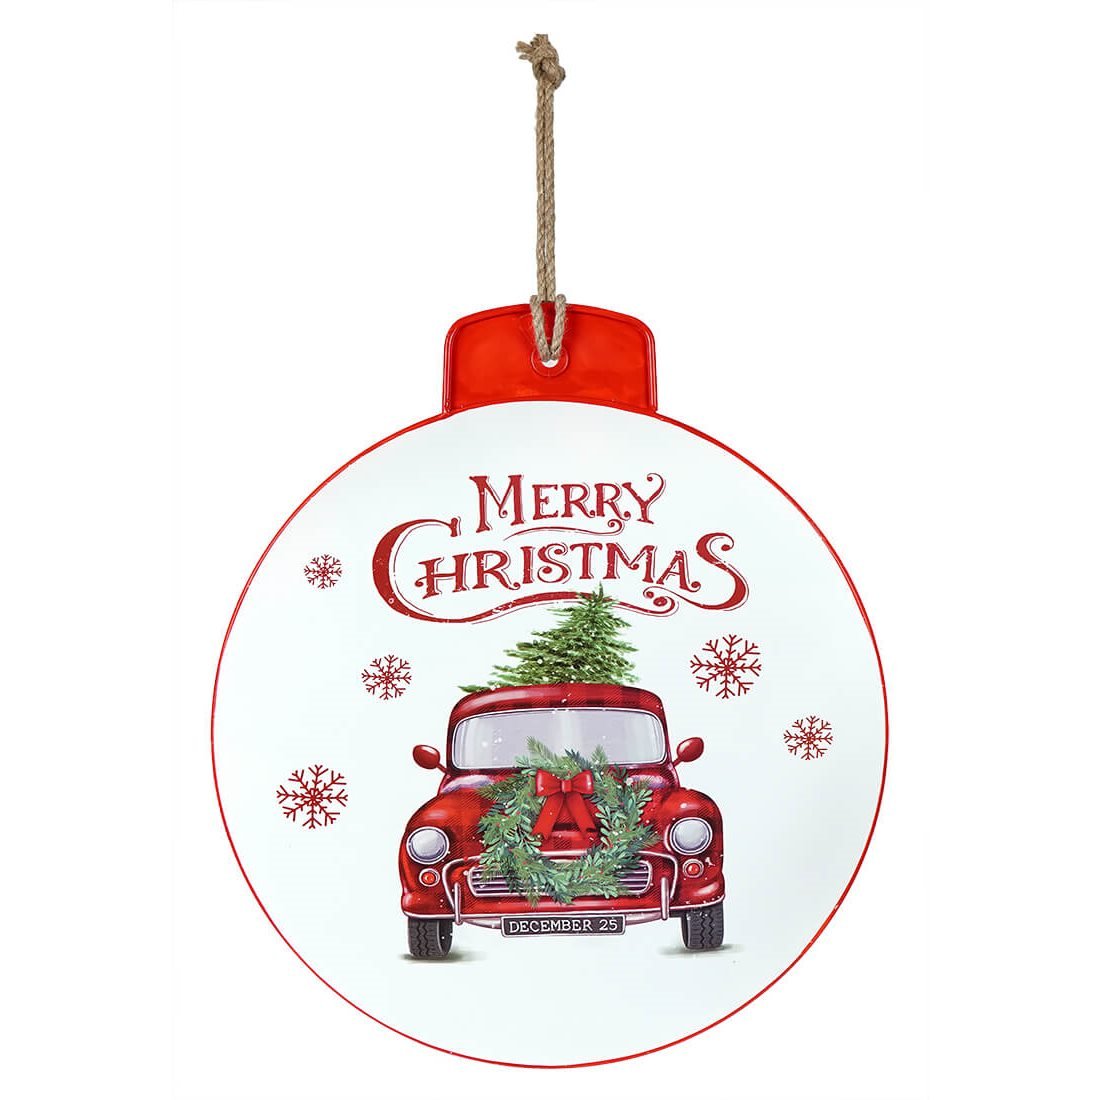 Merry Christmas Hanging Ornament Sign